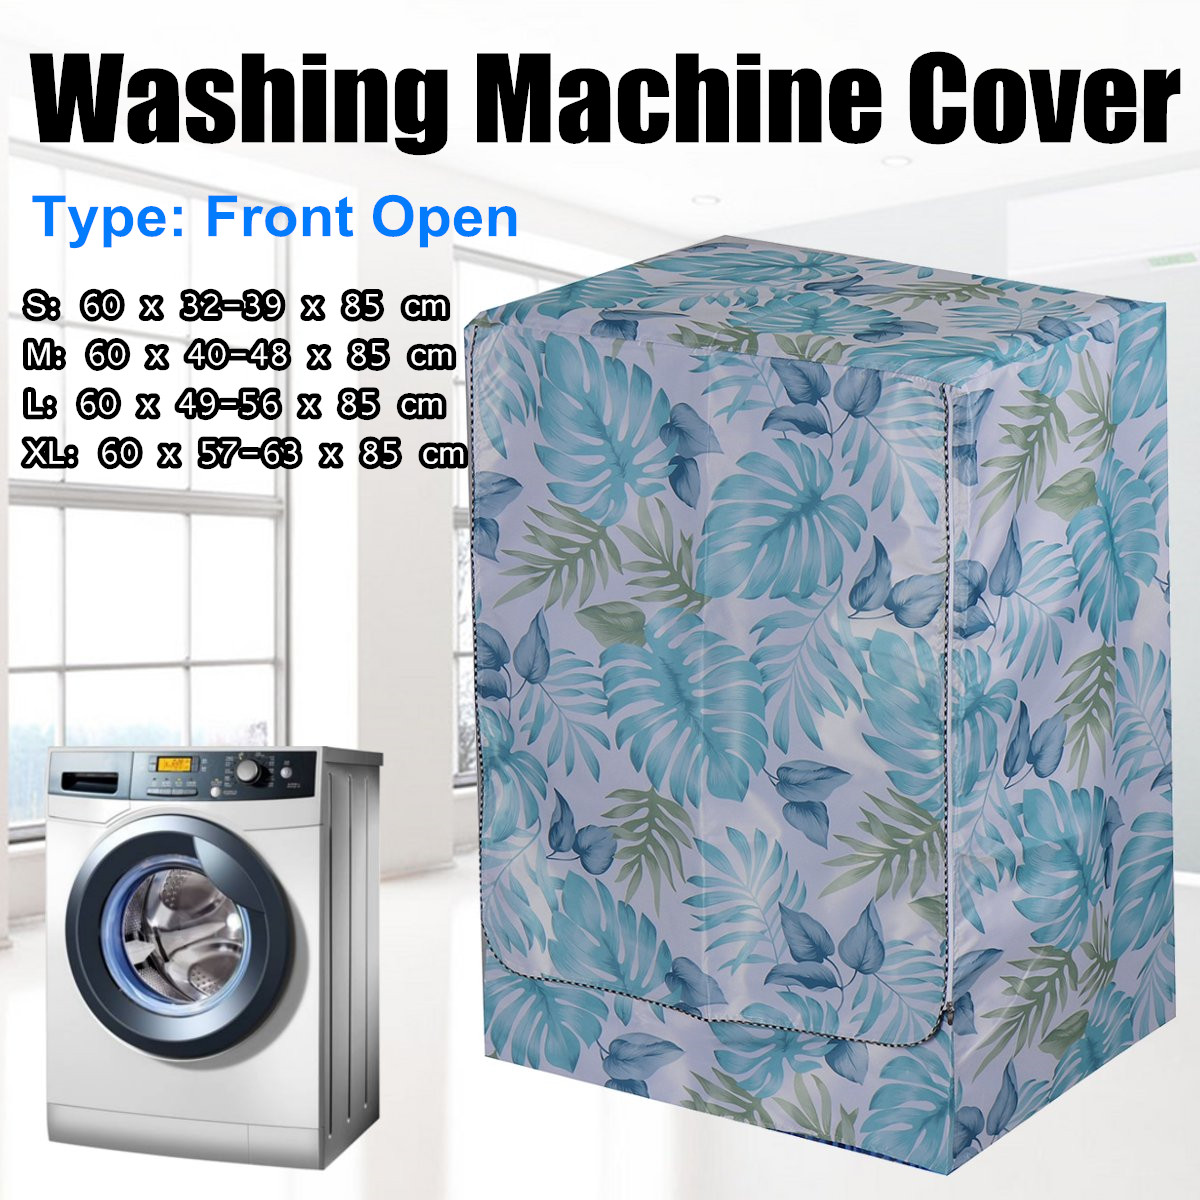 Washing-Machine-Cover-Home-Polyester-Roller-Laundry-Dustproof-Waterproof-Case-Cover-for-Washing-Mach-1794998-1